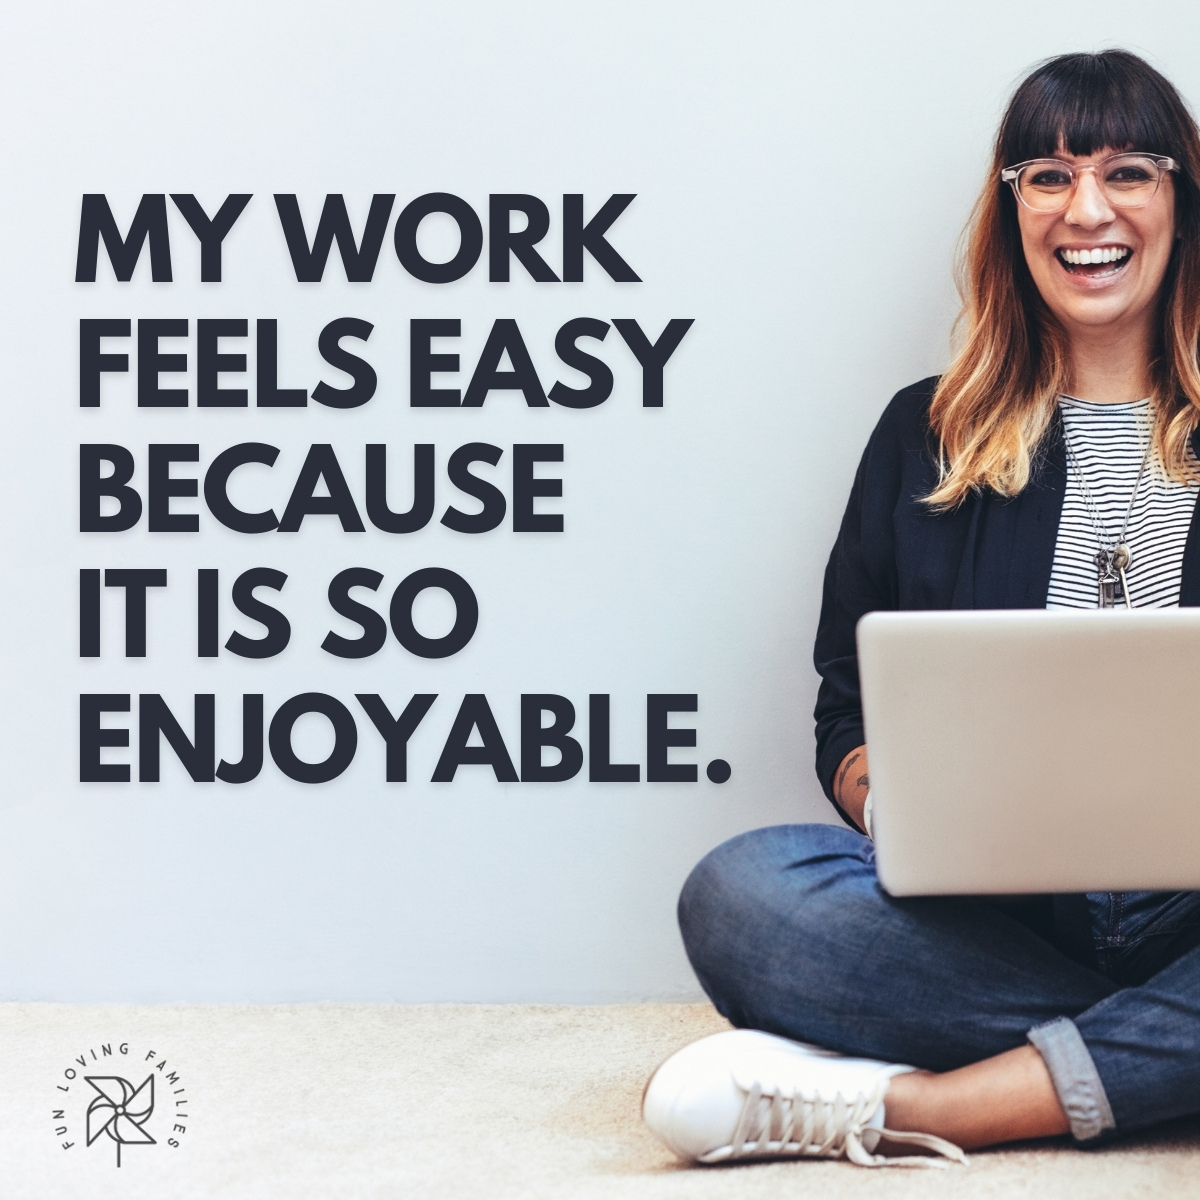 My work feels easy because it is so enjoyable affirmation